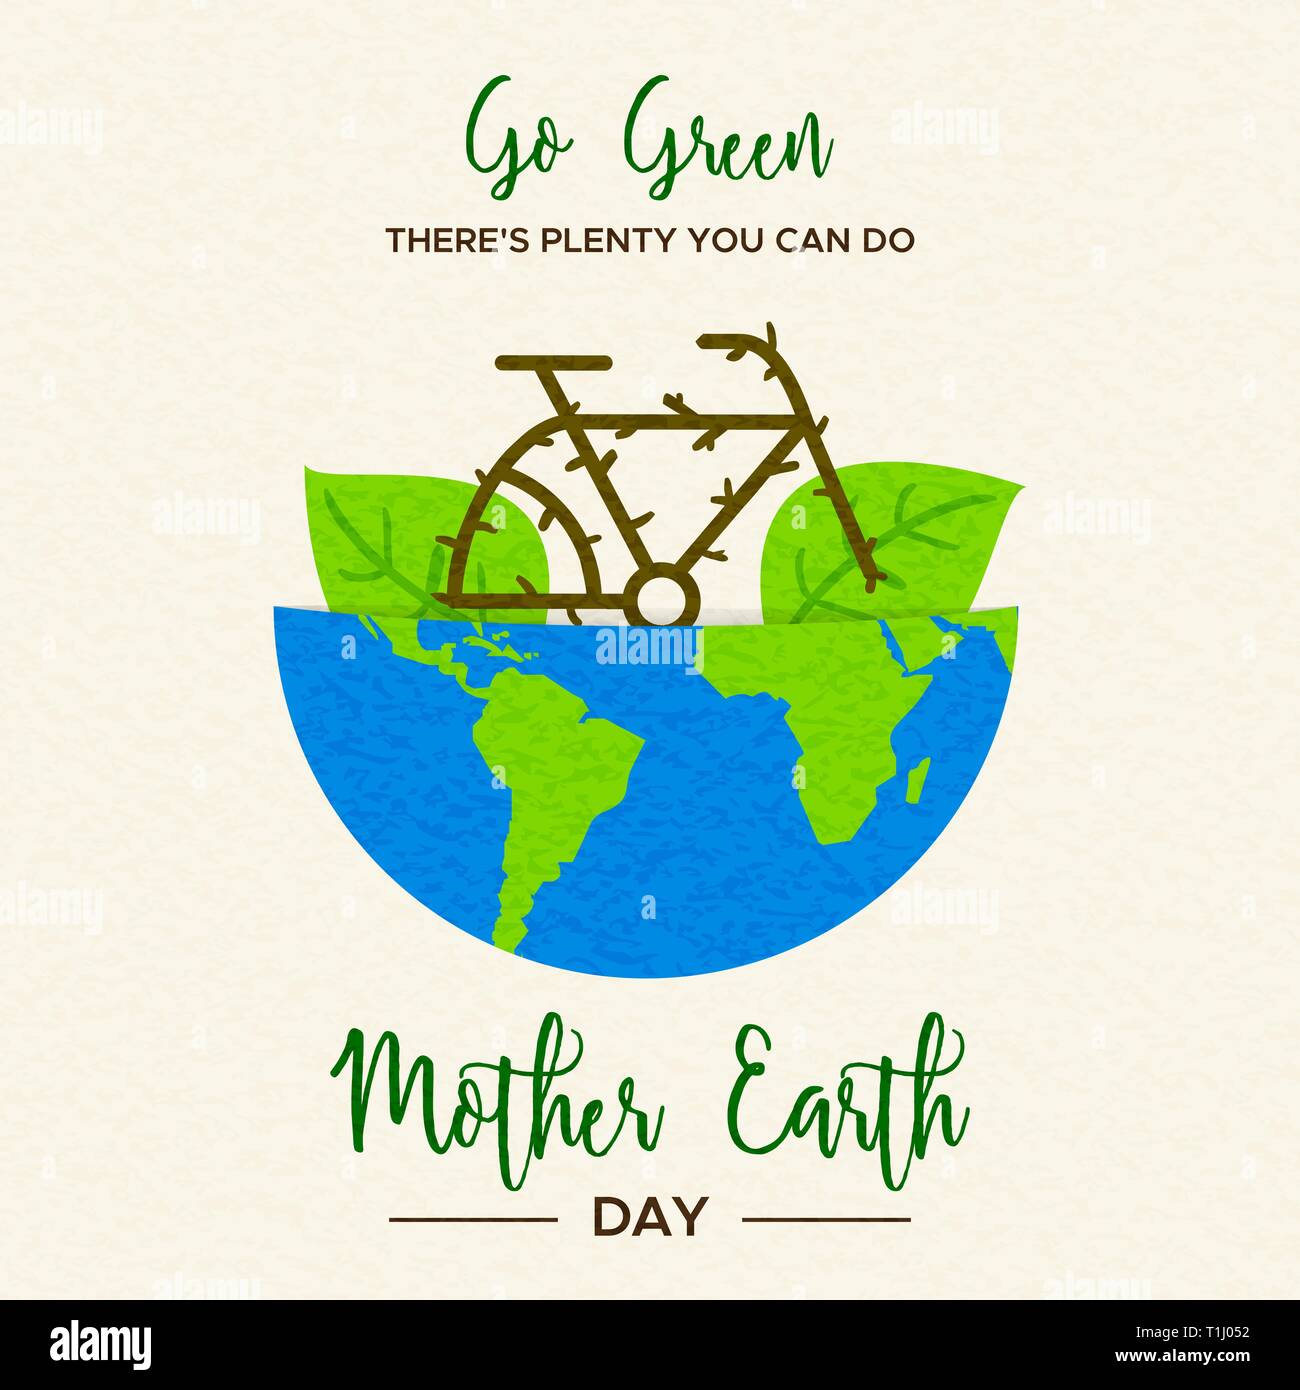 Mother Earth Day illustration of bike inside green planet for eco friendly transport and environment care. Stock Vector